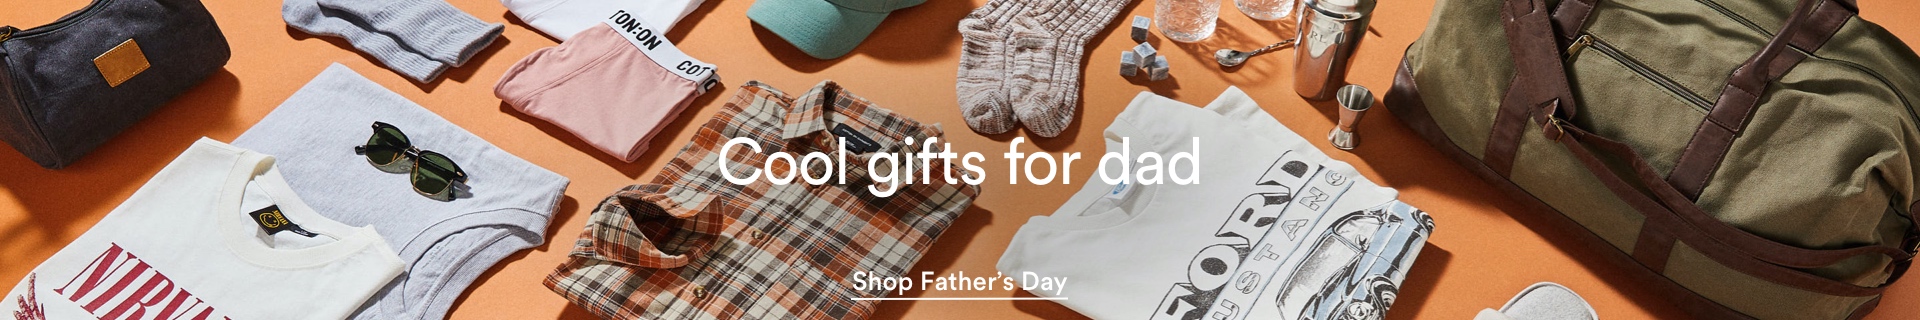 Cool gifts for dad. Click to Shop Father's Day Gifts.